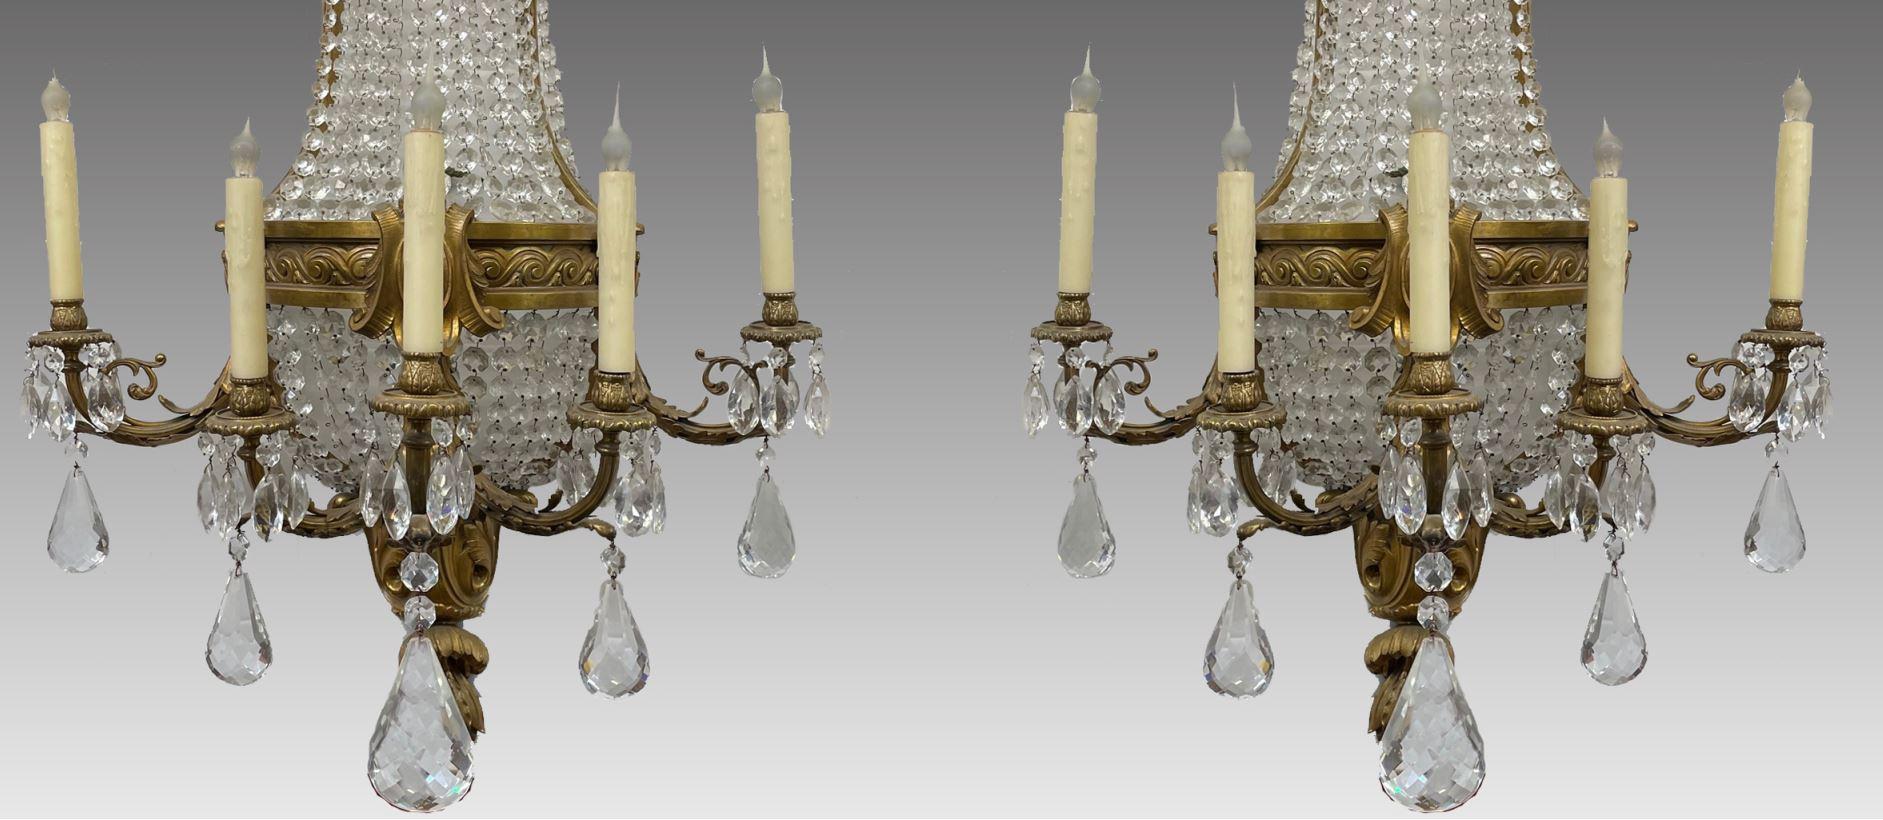 Pair of Gilt Bronze and Crystal Sconces, French 19th Century In Good Condition For Sale In Cypress, CA